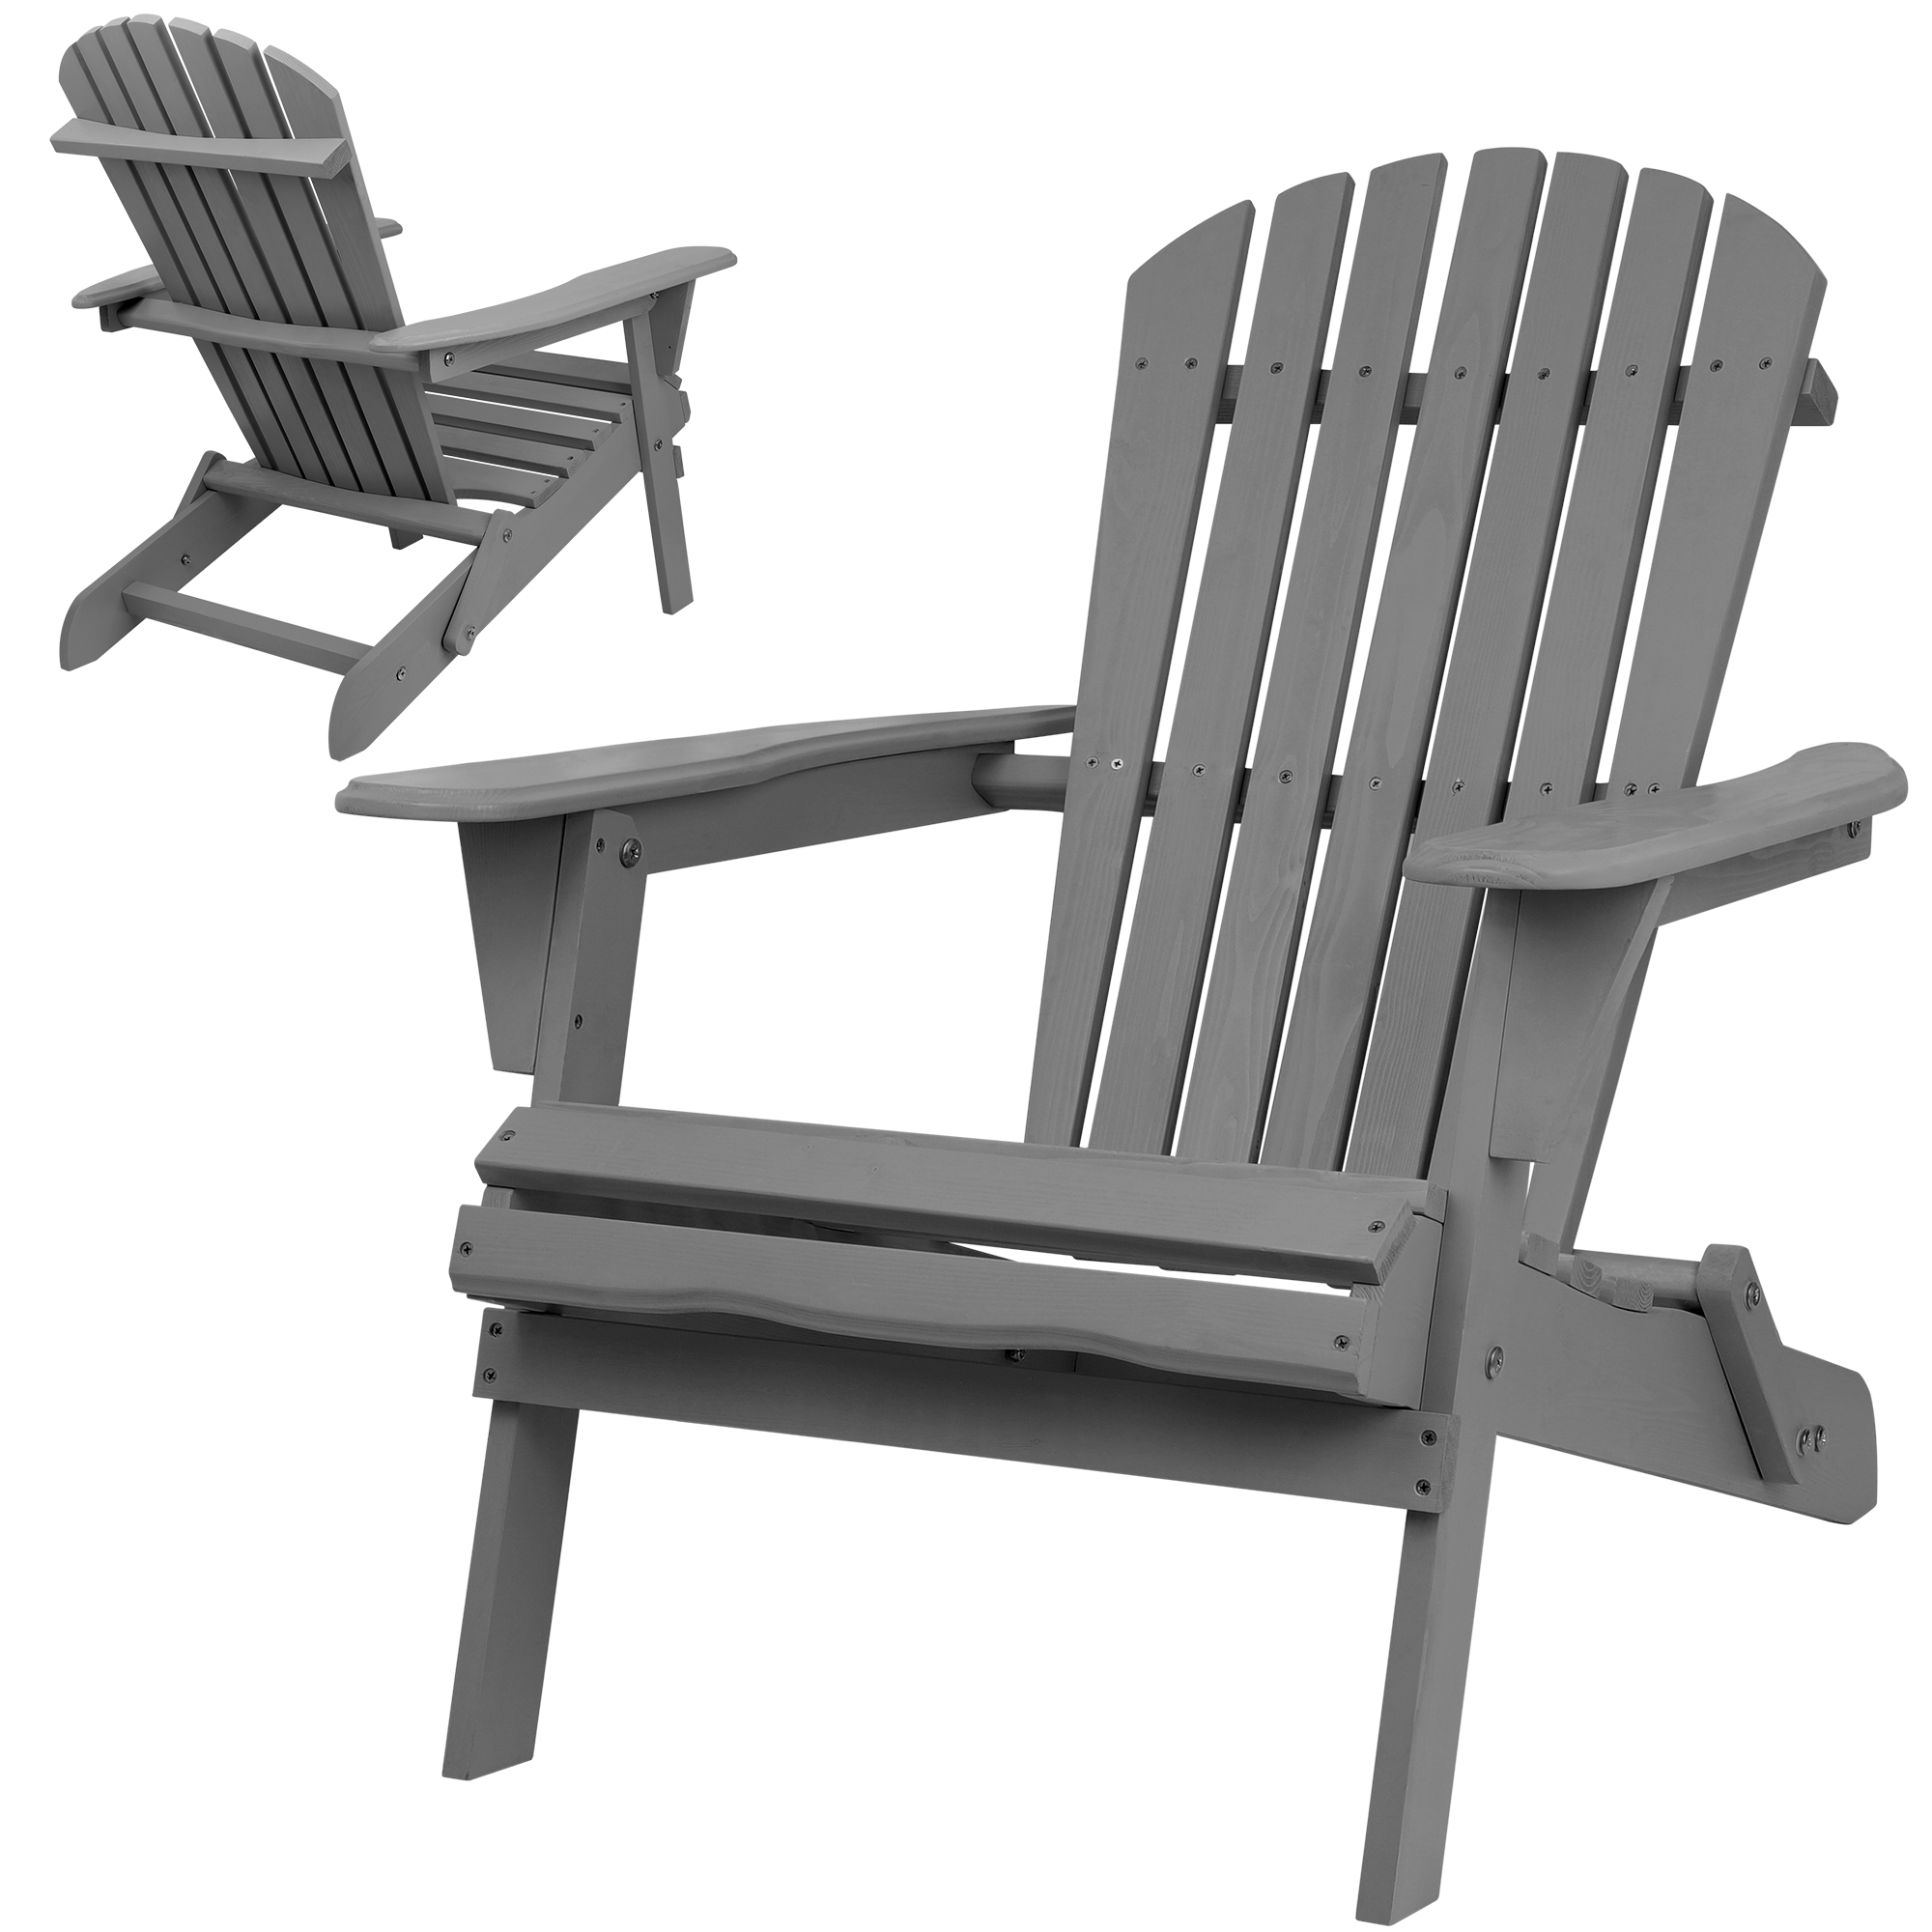 Outdoor Adirondack Chair, Wood Patio Chair Folding Design, High Backrest Fire Pit Lounge Chair for Backyard Porch Poolside Deck, Half Assembled, 1 PCS - image 3 of 10